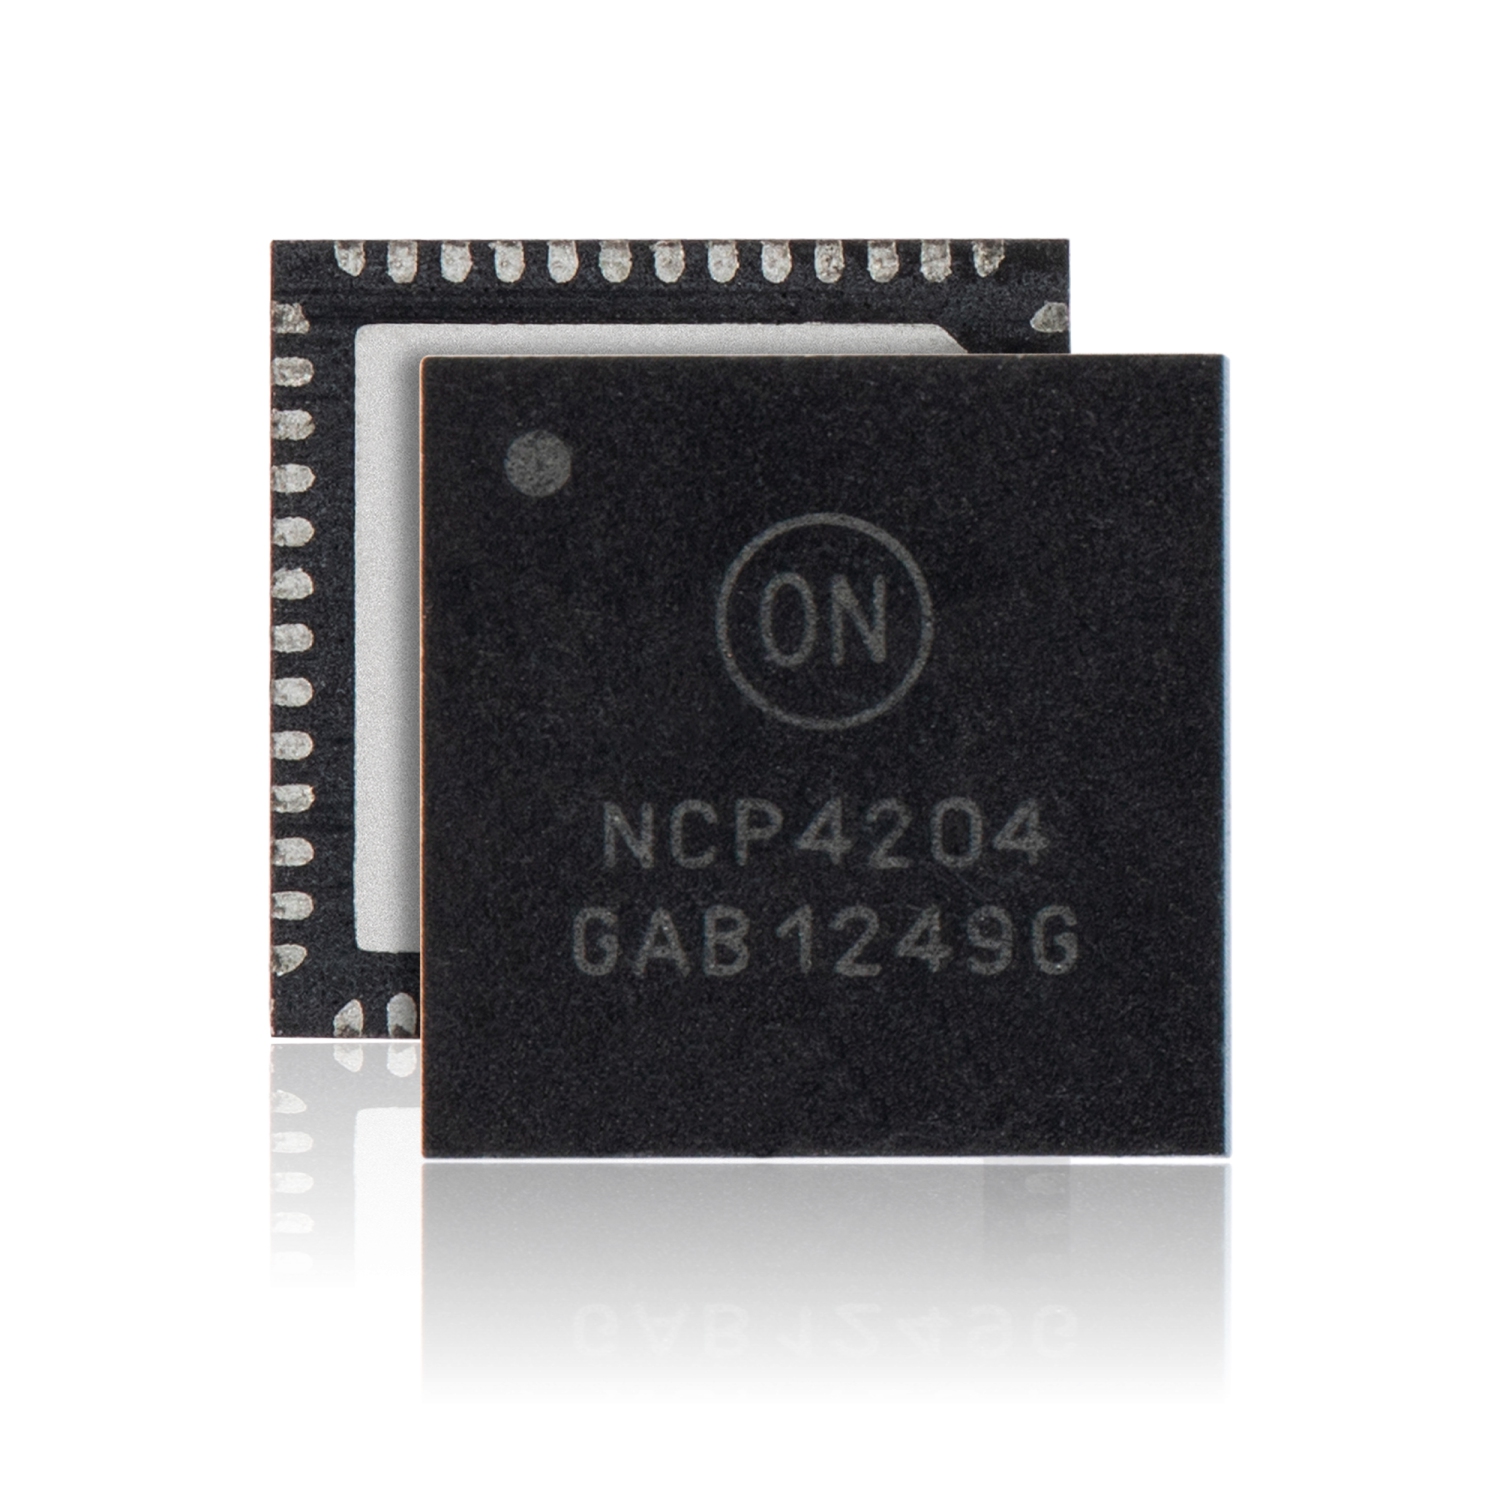 Replacement Integrated Power Control IC Chip Compatible With Xbox One (NCP4204 GAC1328G)